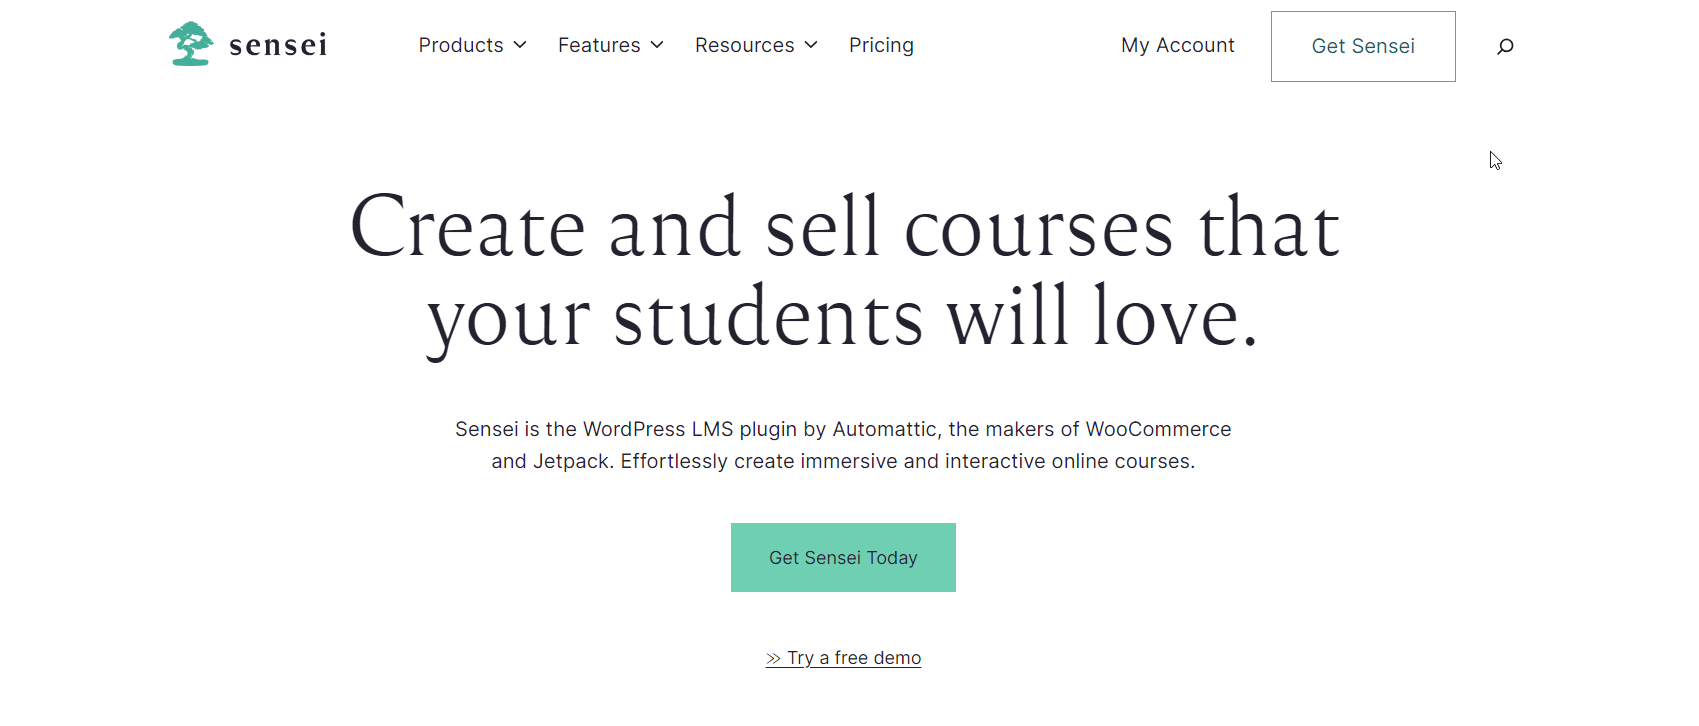 Sensei makes it easy to develop immersive and interactive online courses. 